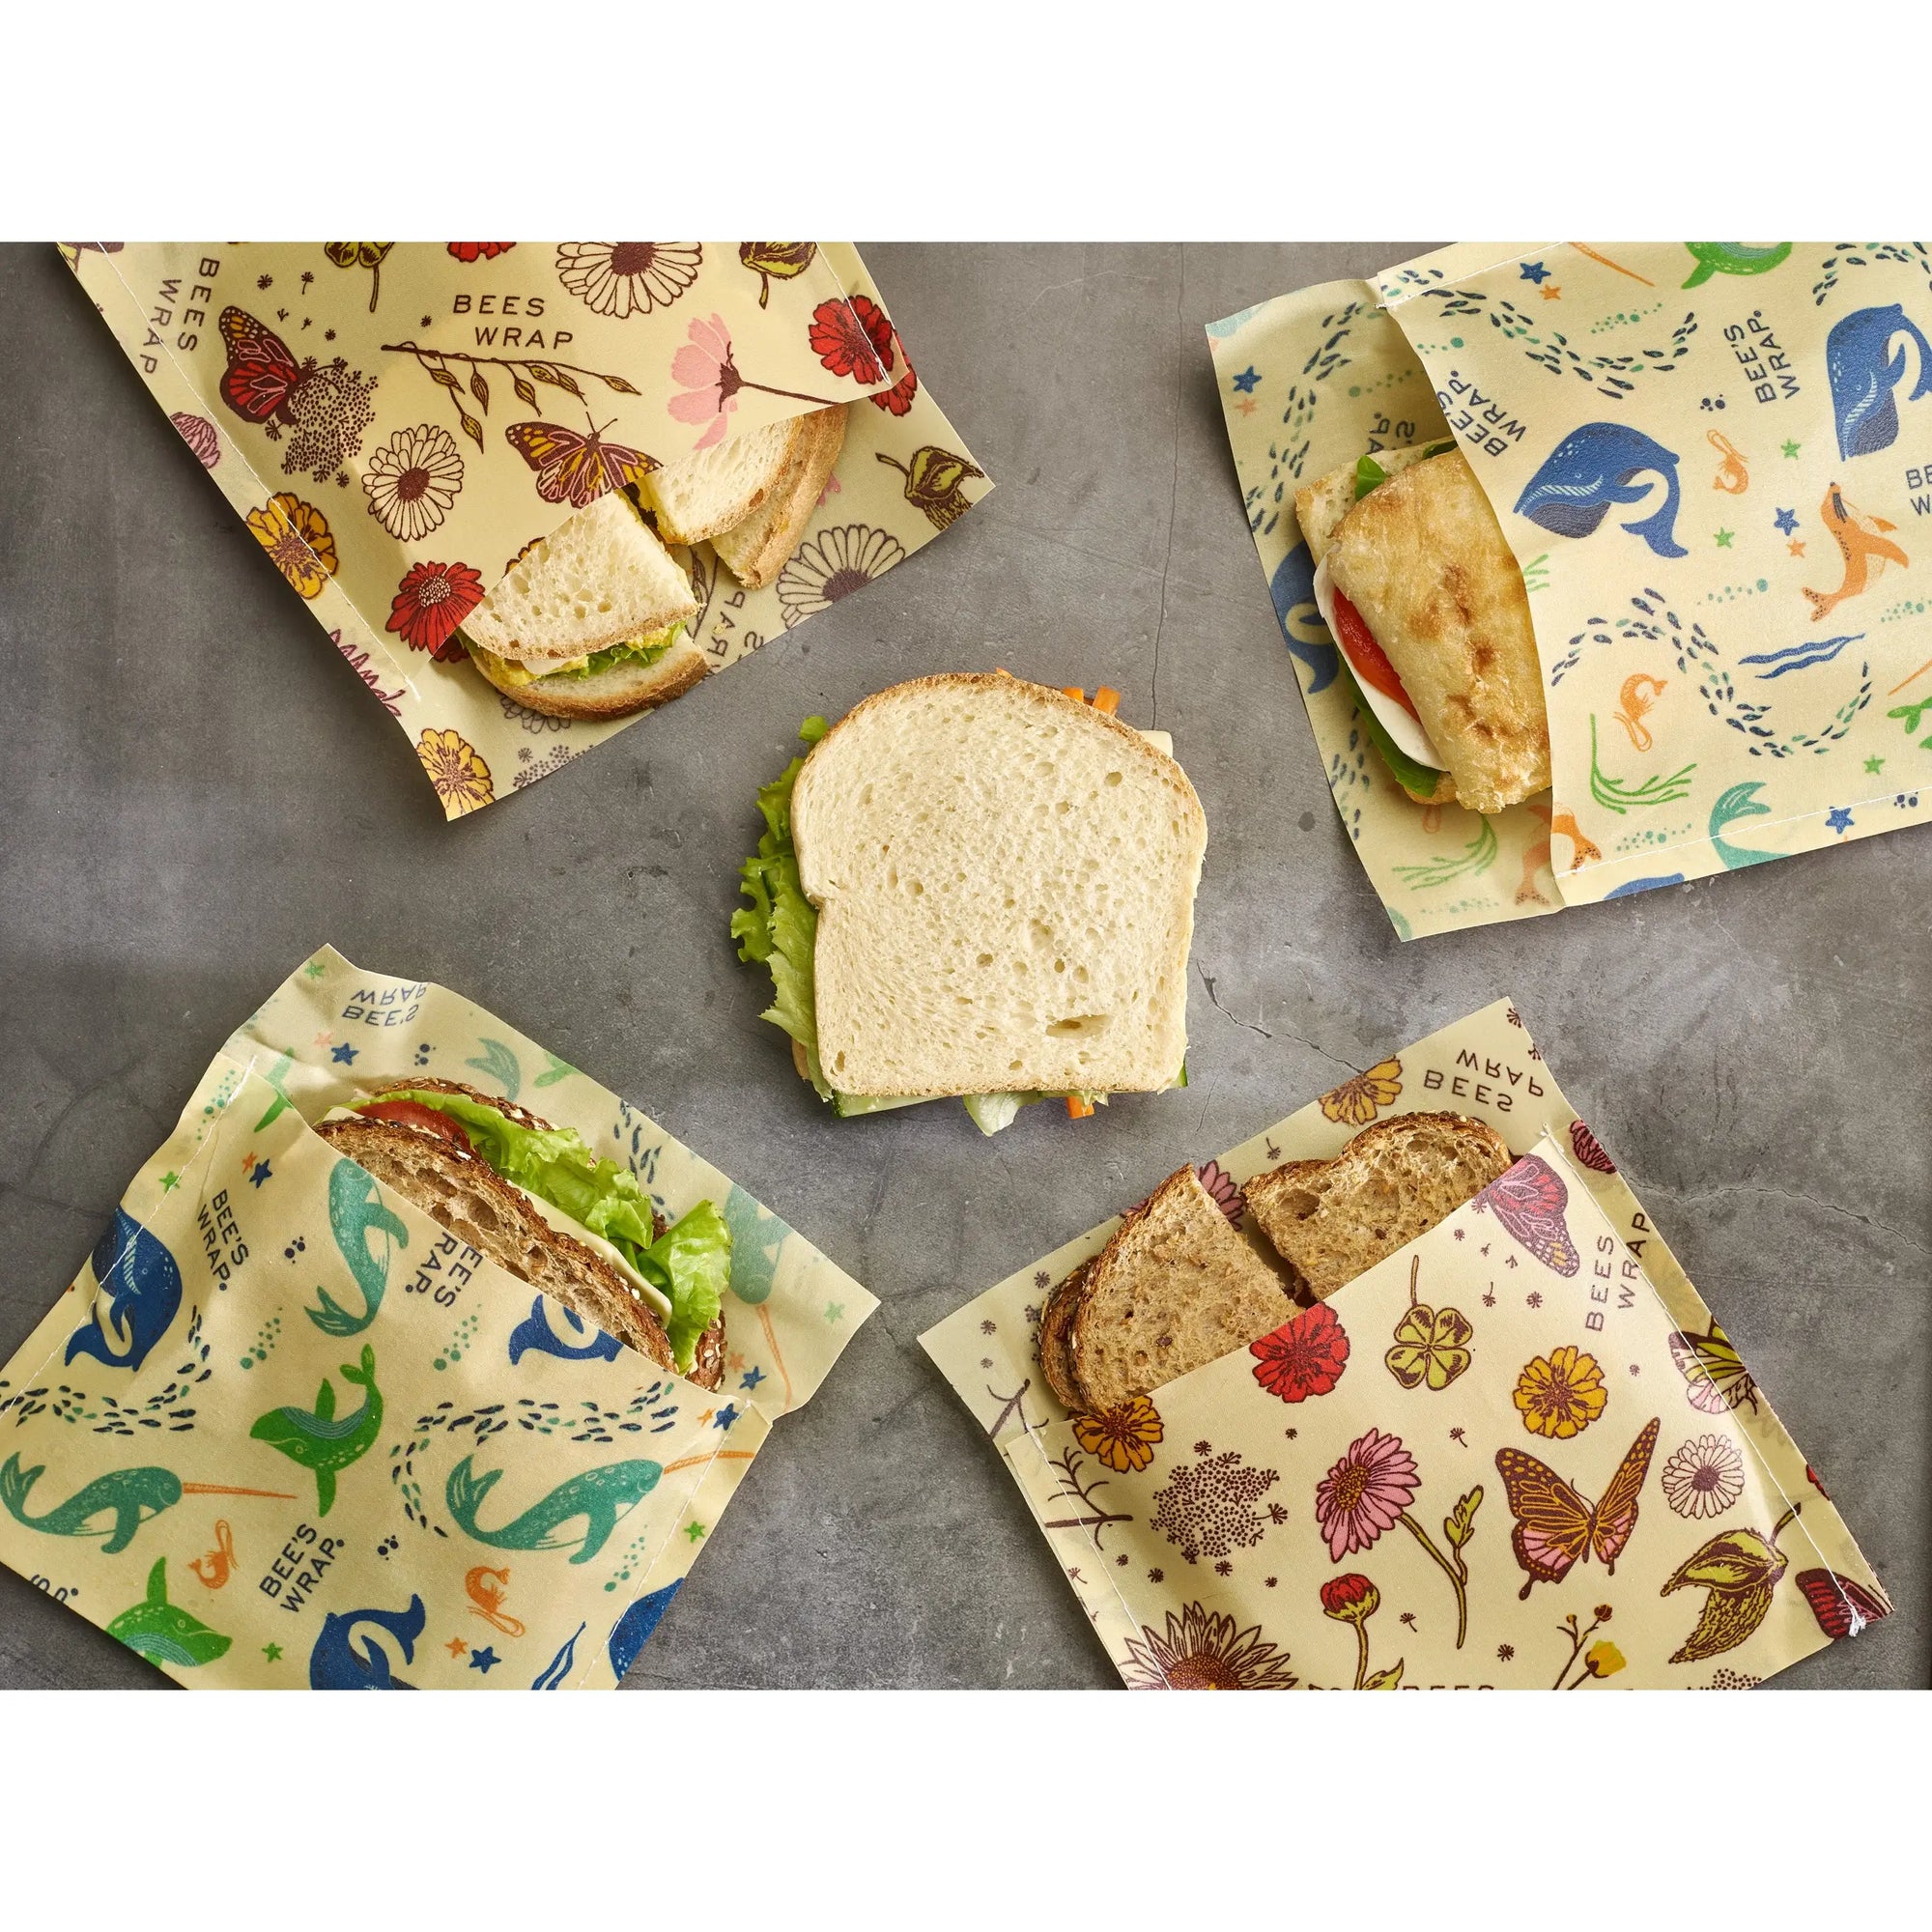 Snack and Sandwich Wraps